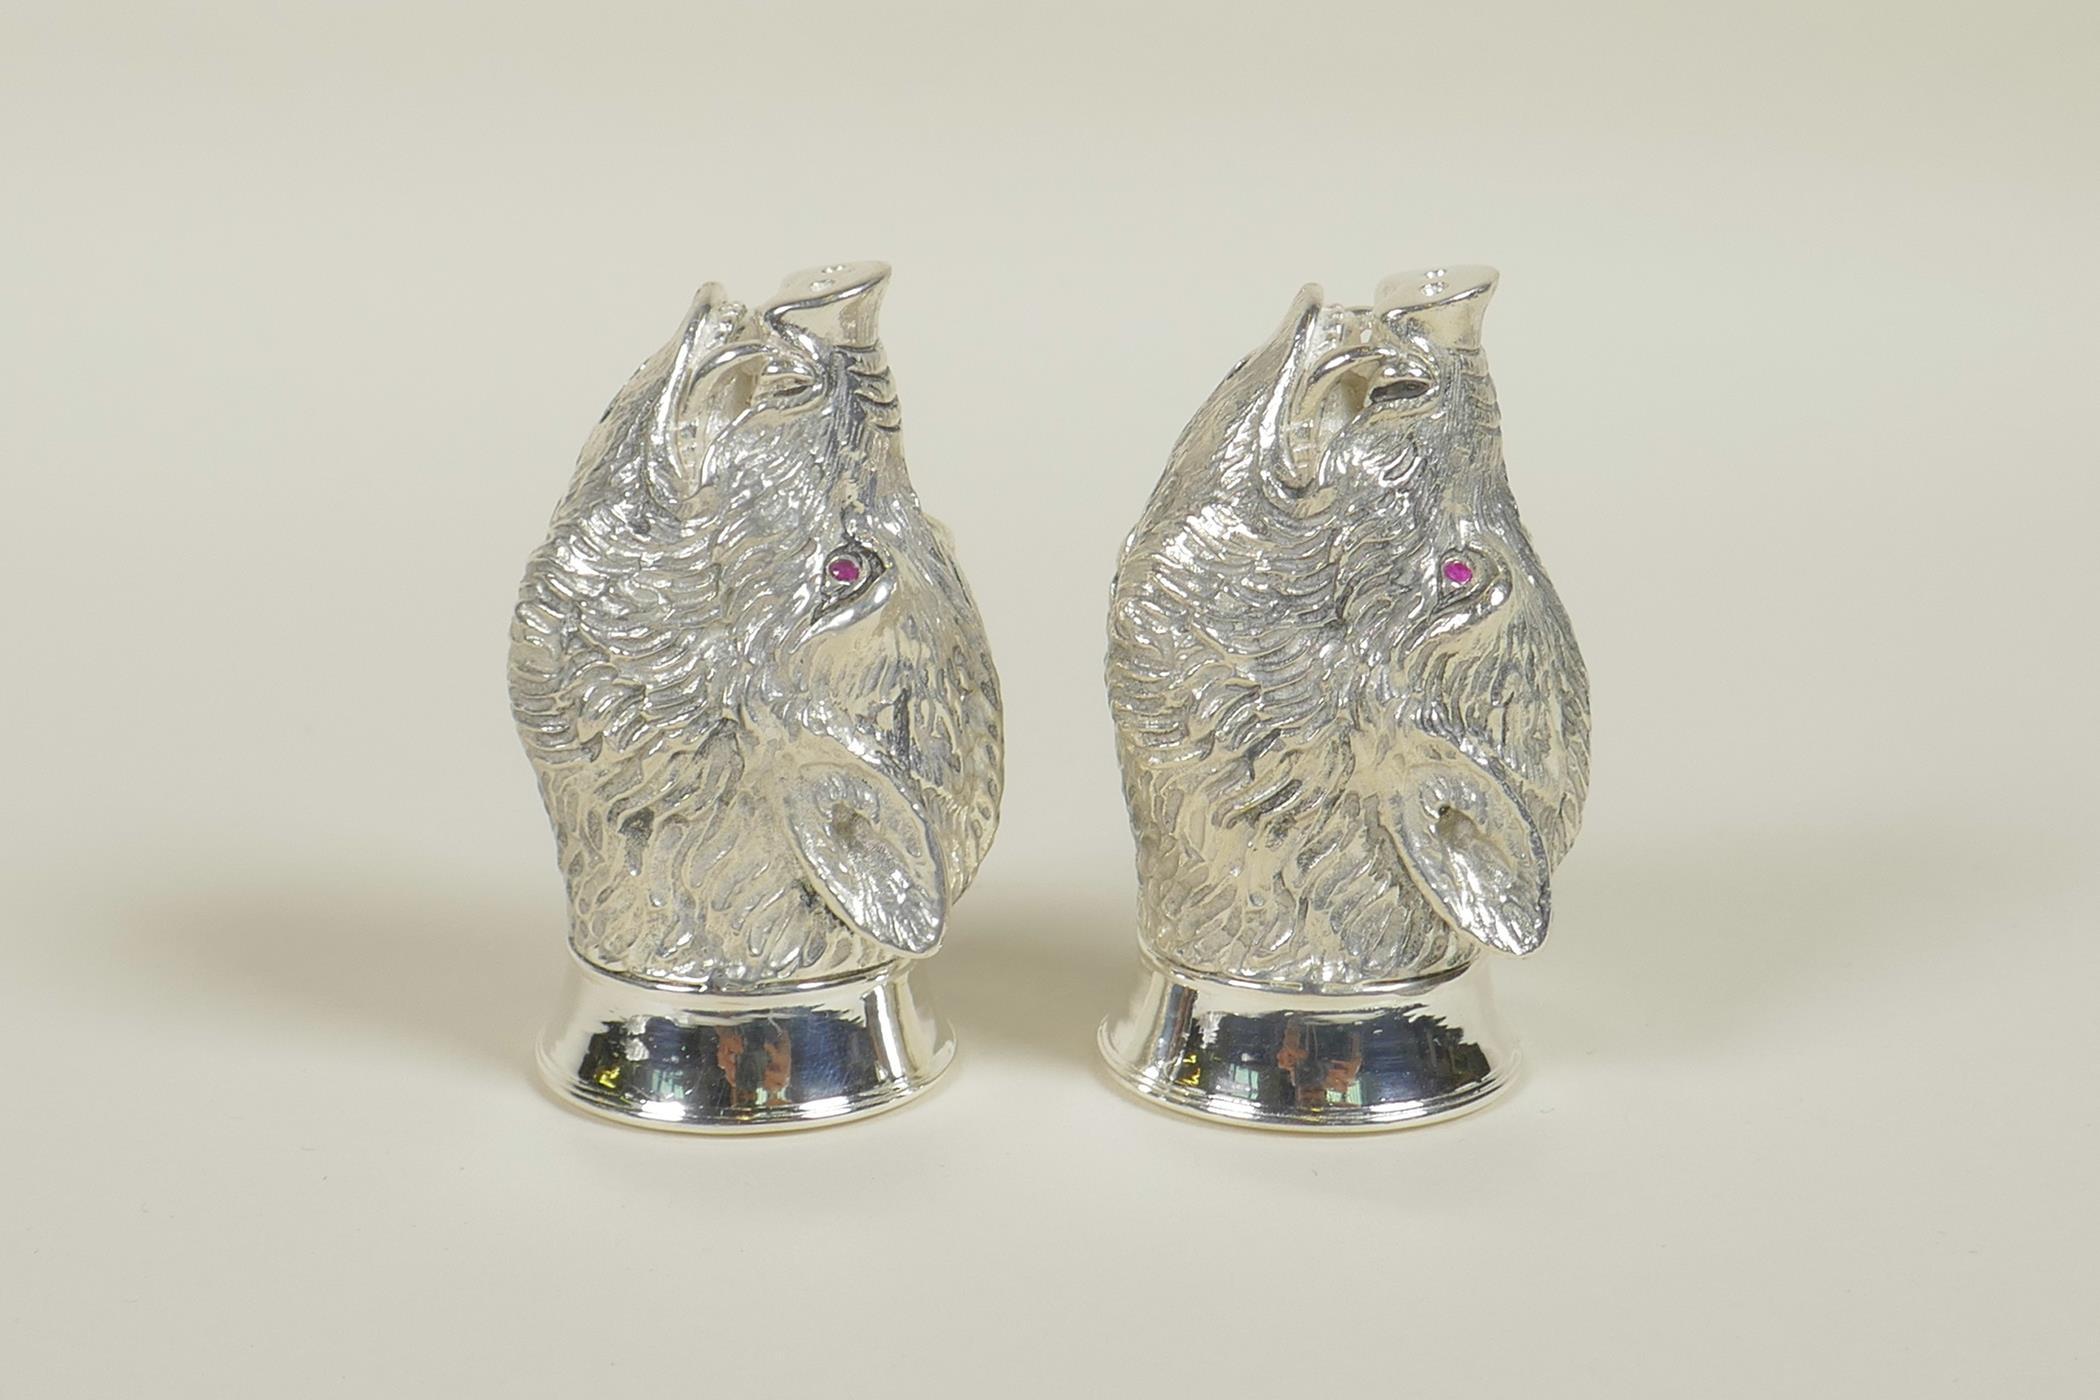 A pair of silver plated salt and pepper cruets in the form of boars' heads, 2" long